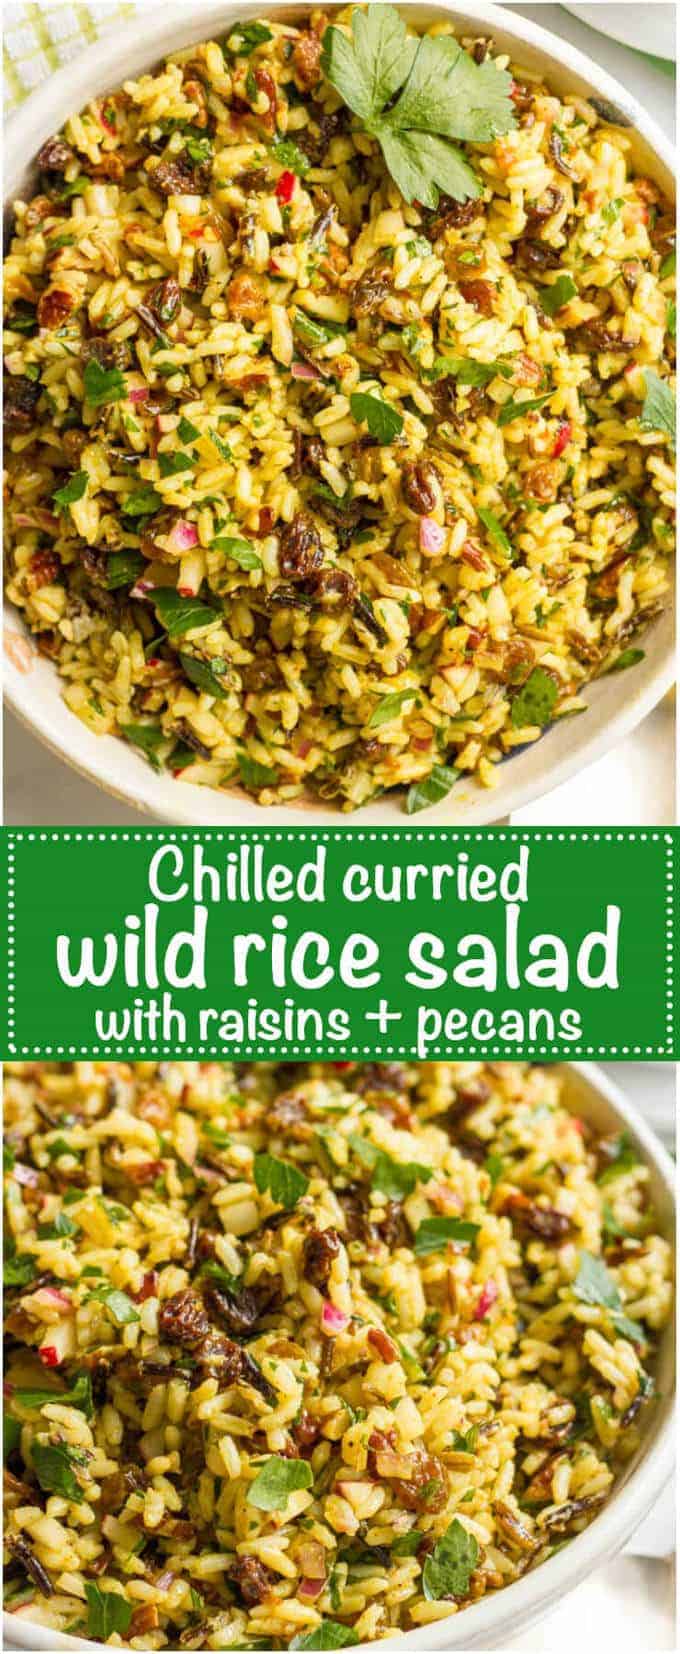 Cold curried wild rice salad with raisins and pecans - an addictive and easy side dish! | www.familyfoodonthetable.com